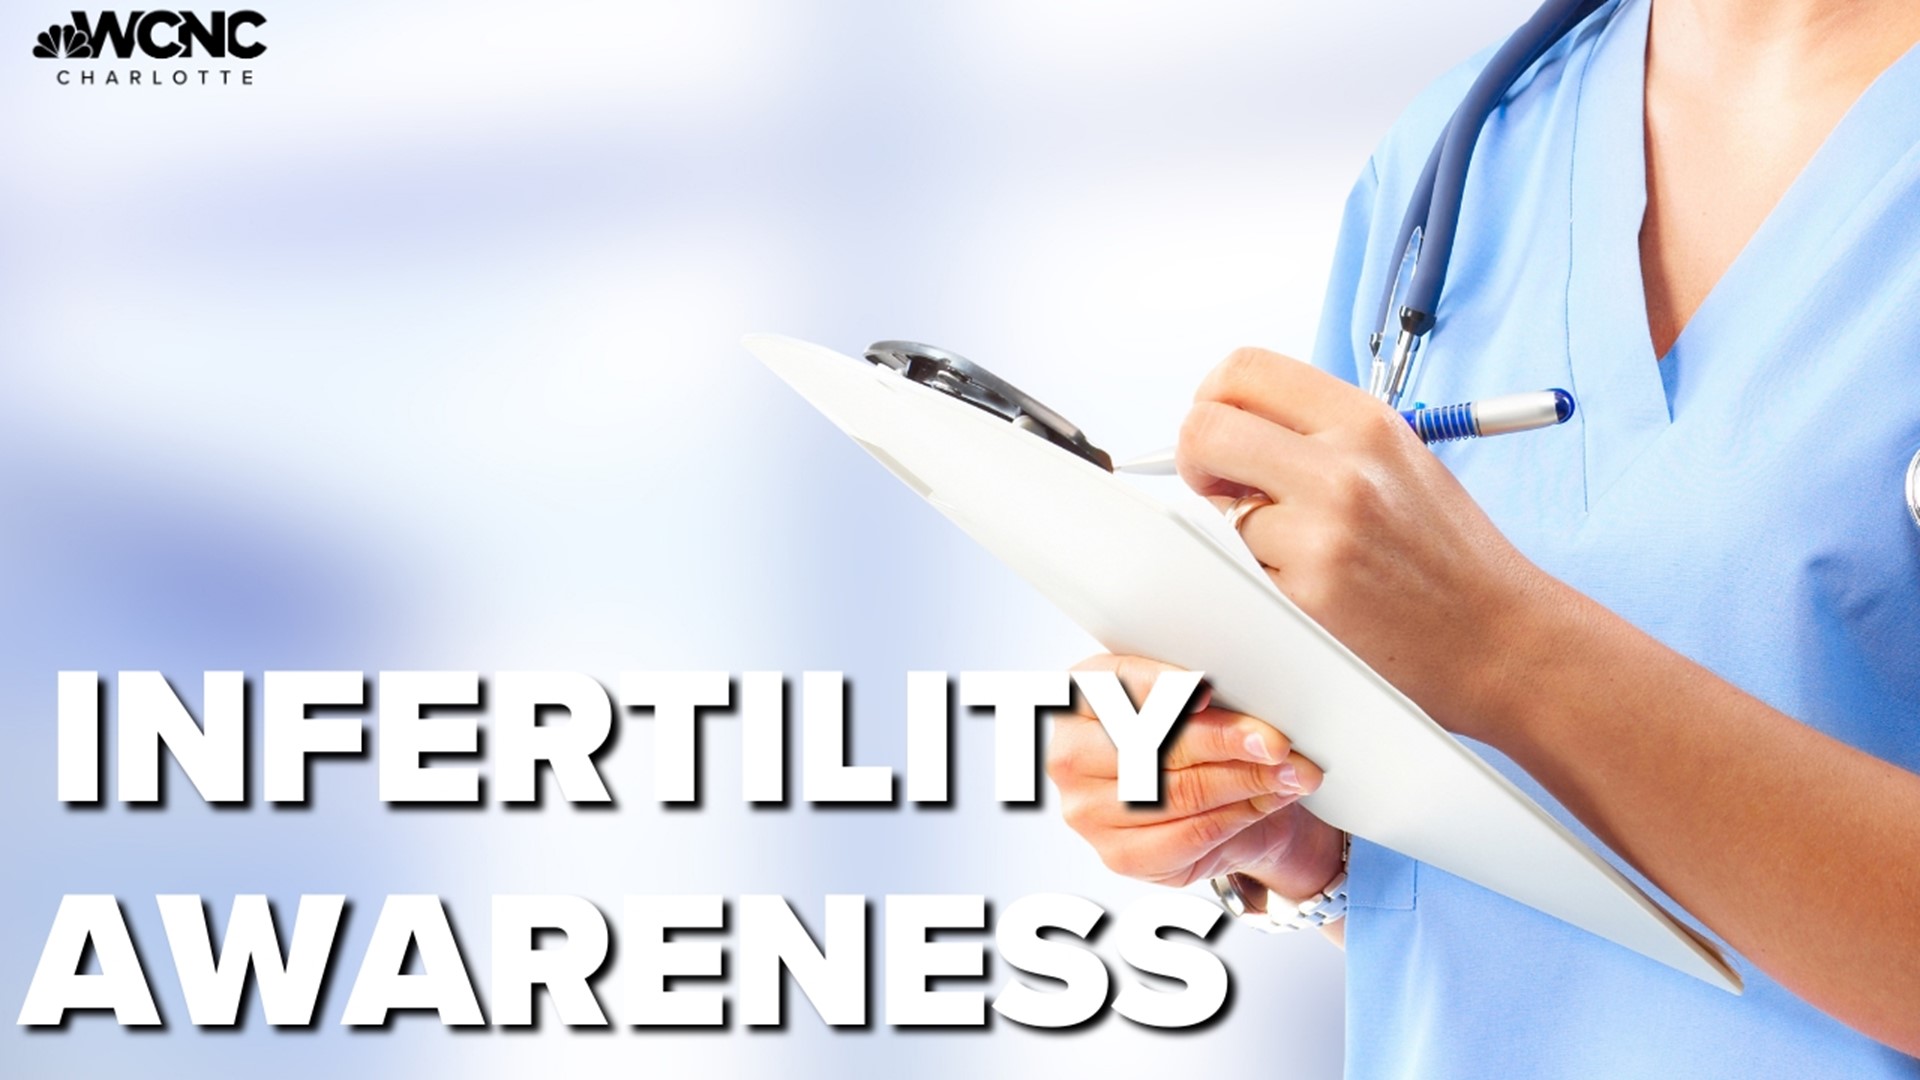 According to the World Health Organization, one in every six people face fertility challenges.